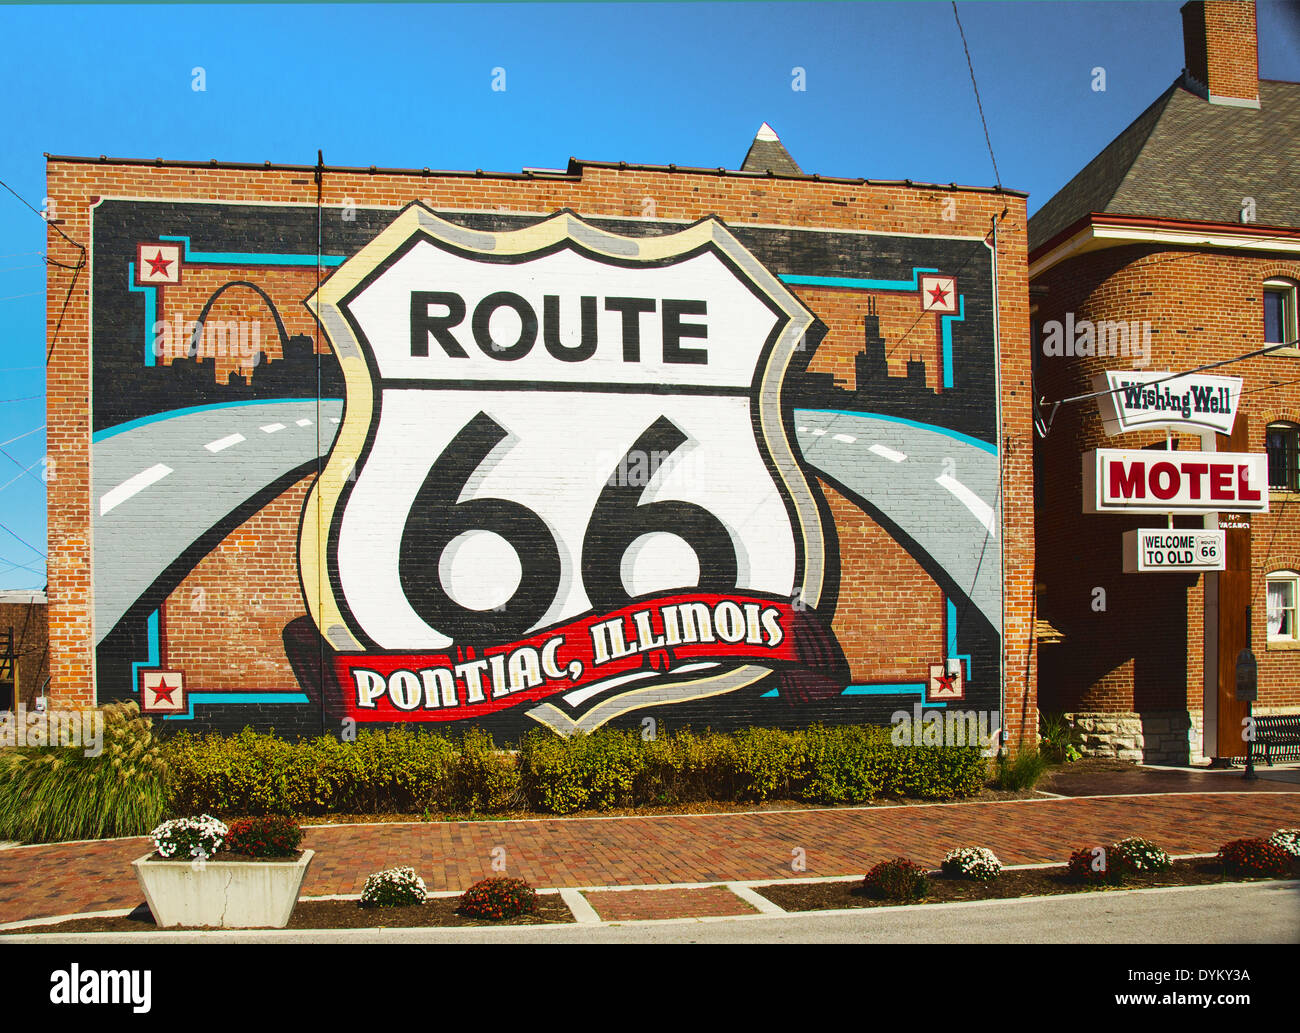 Route 66 mural painted on the back of the Route 66 Hall of Fame and Museum in Pontiac, Illinois a town along Route 66. Stock Photo